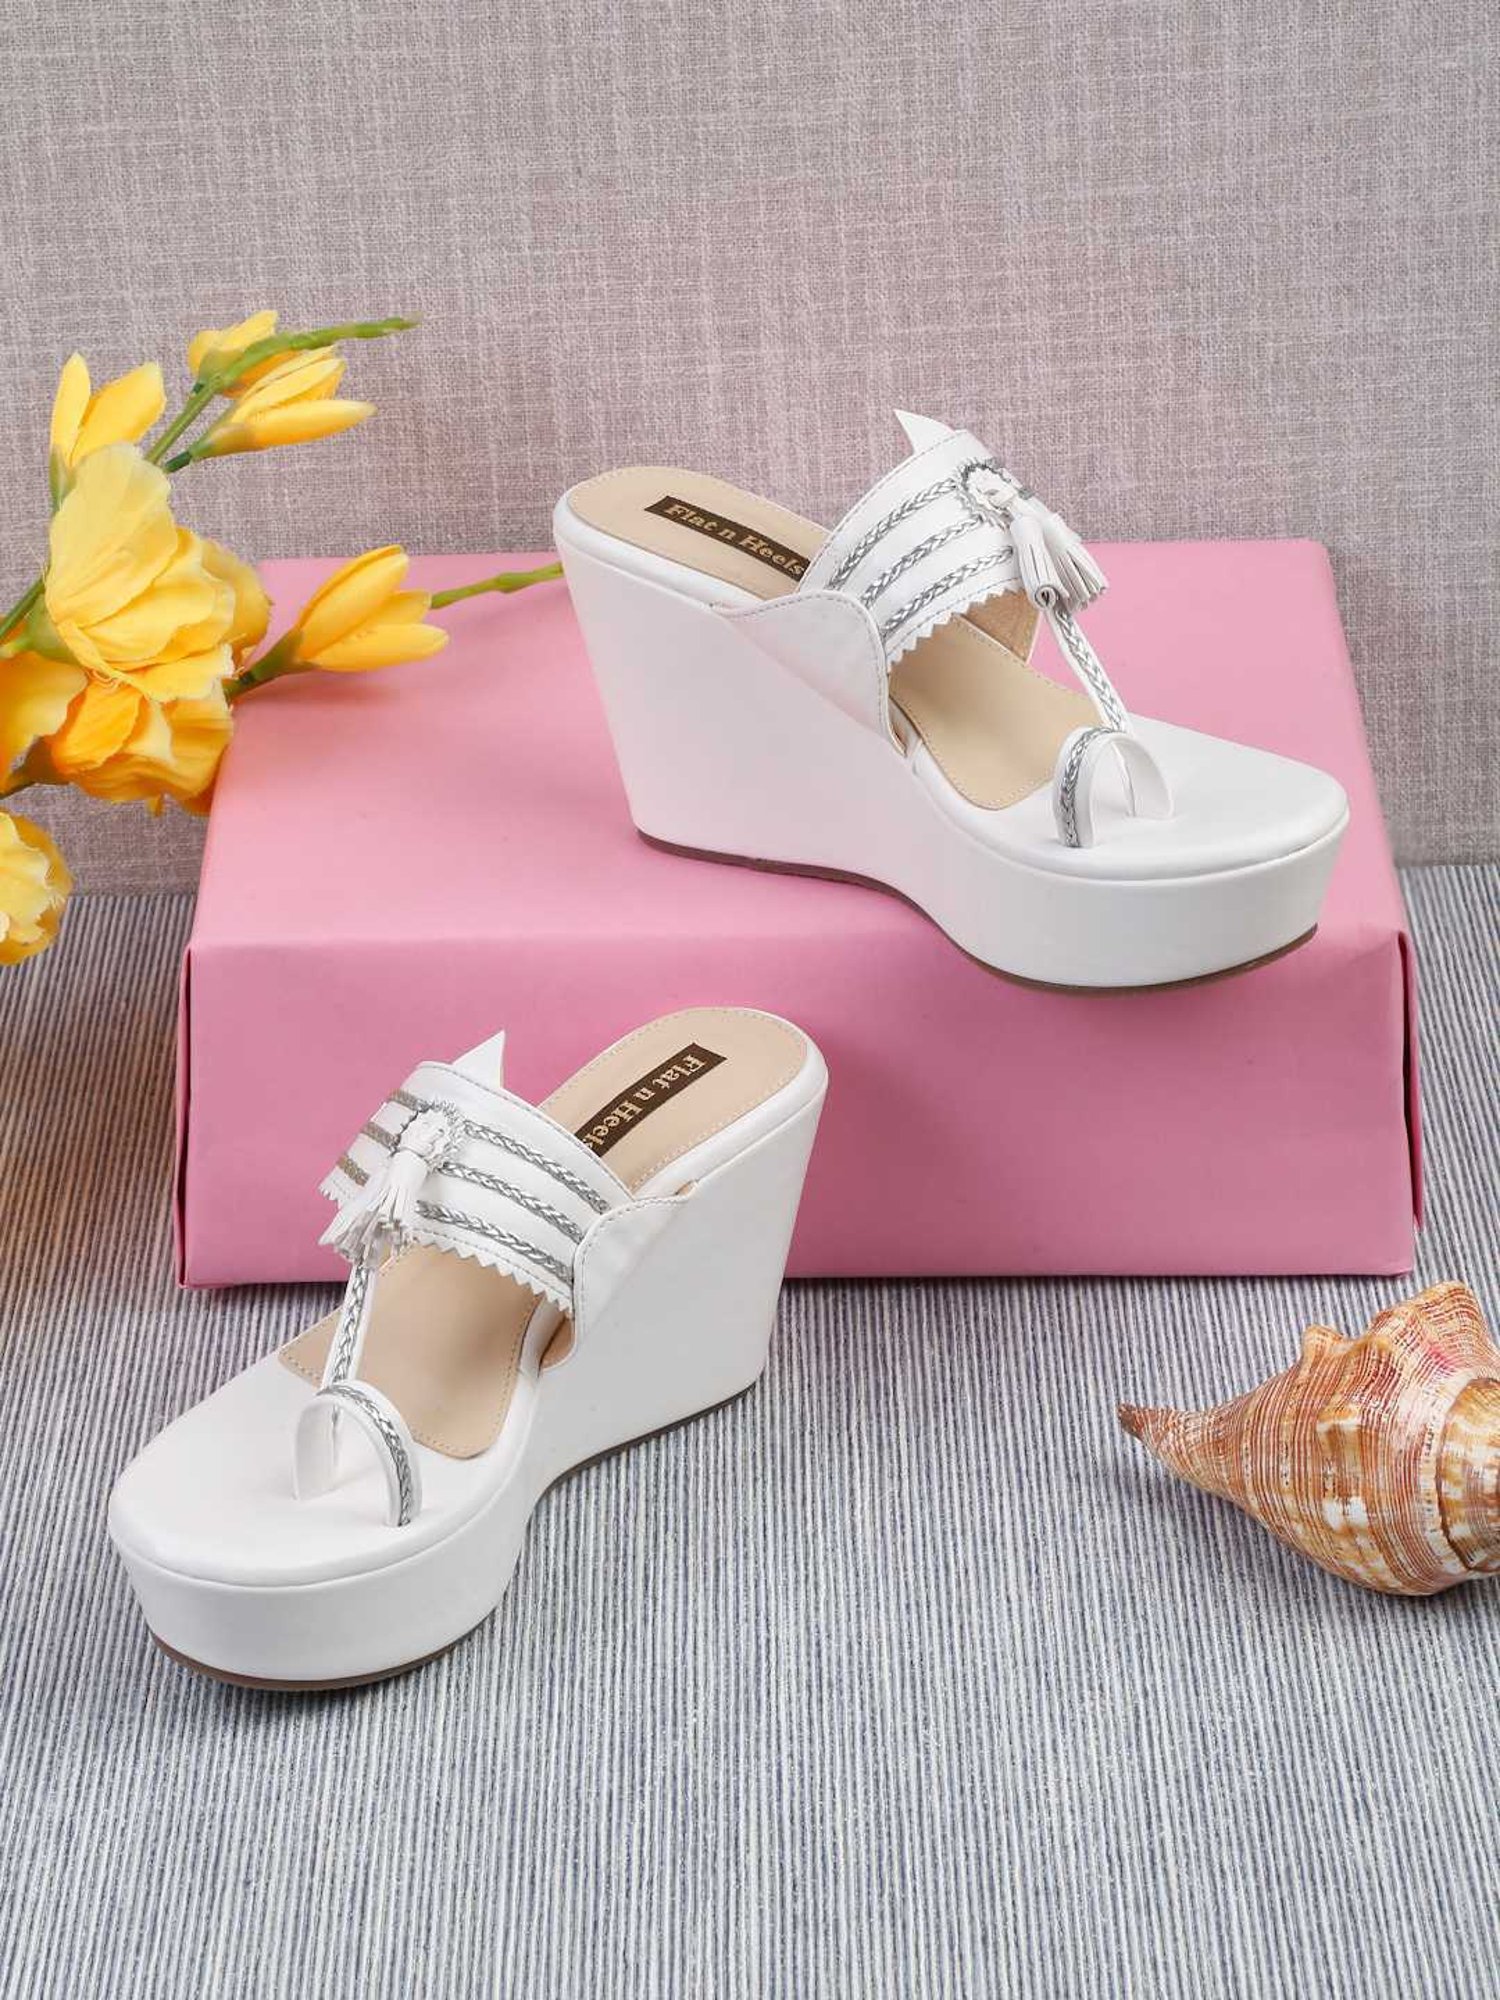 Explore the Trendy Wedge Heels for Parties, Weddings and Daily Wear